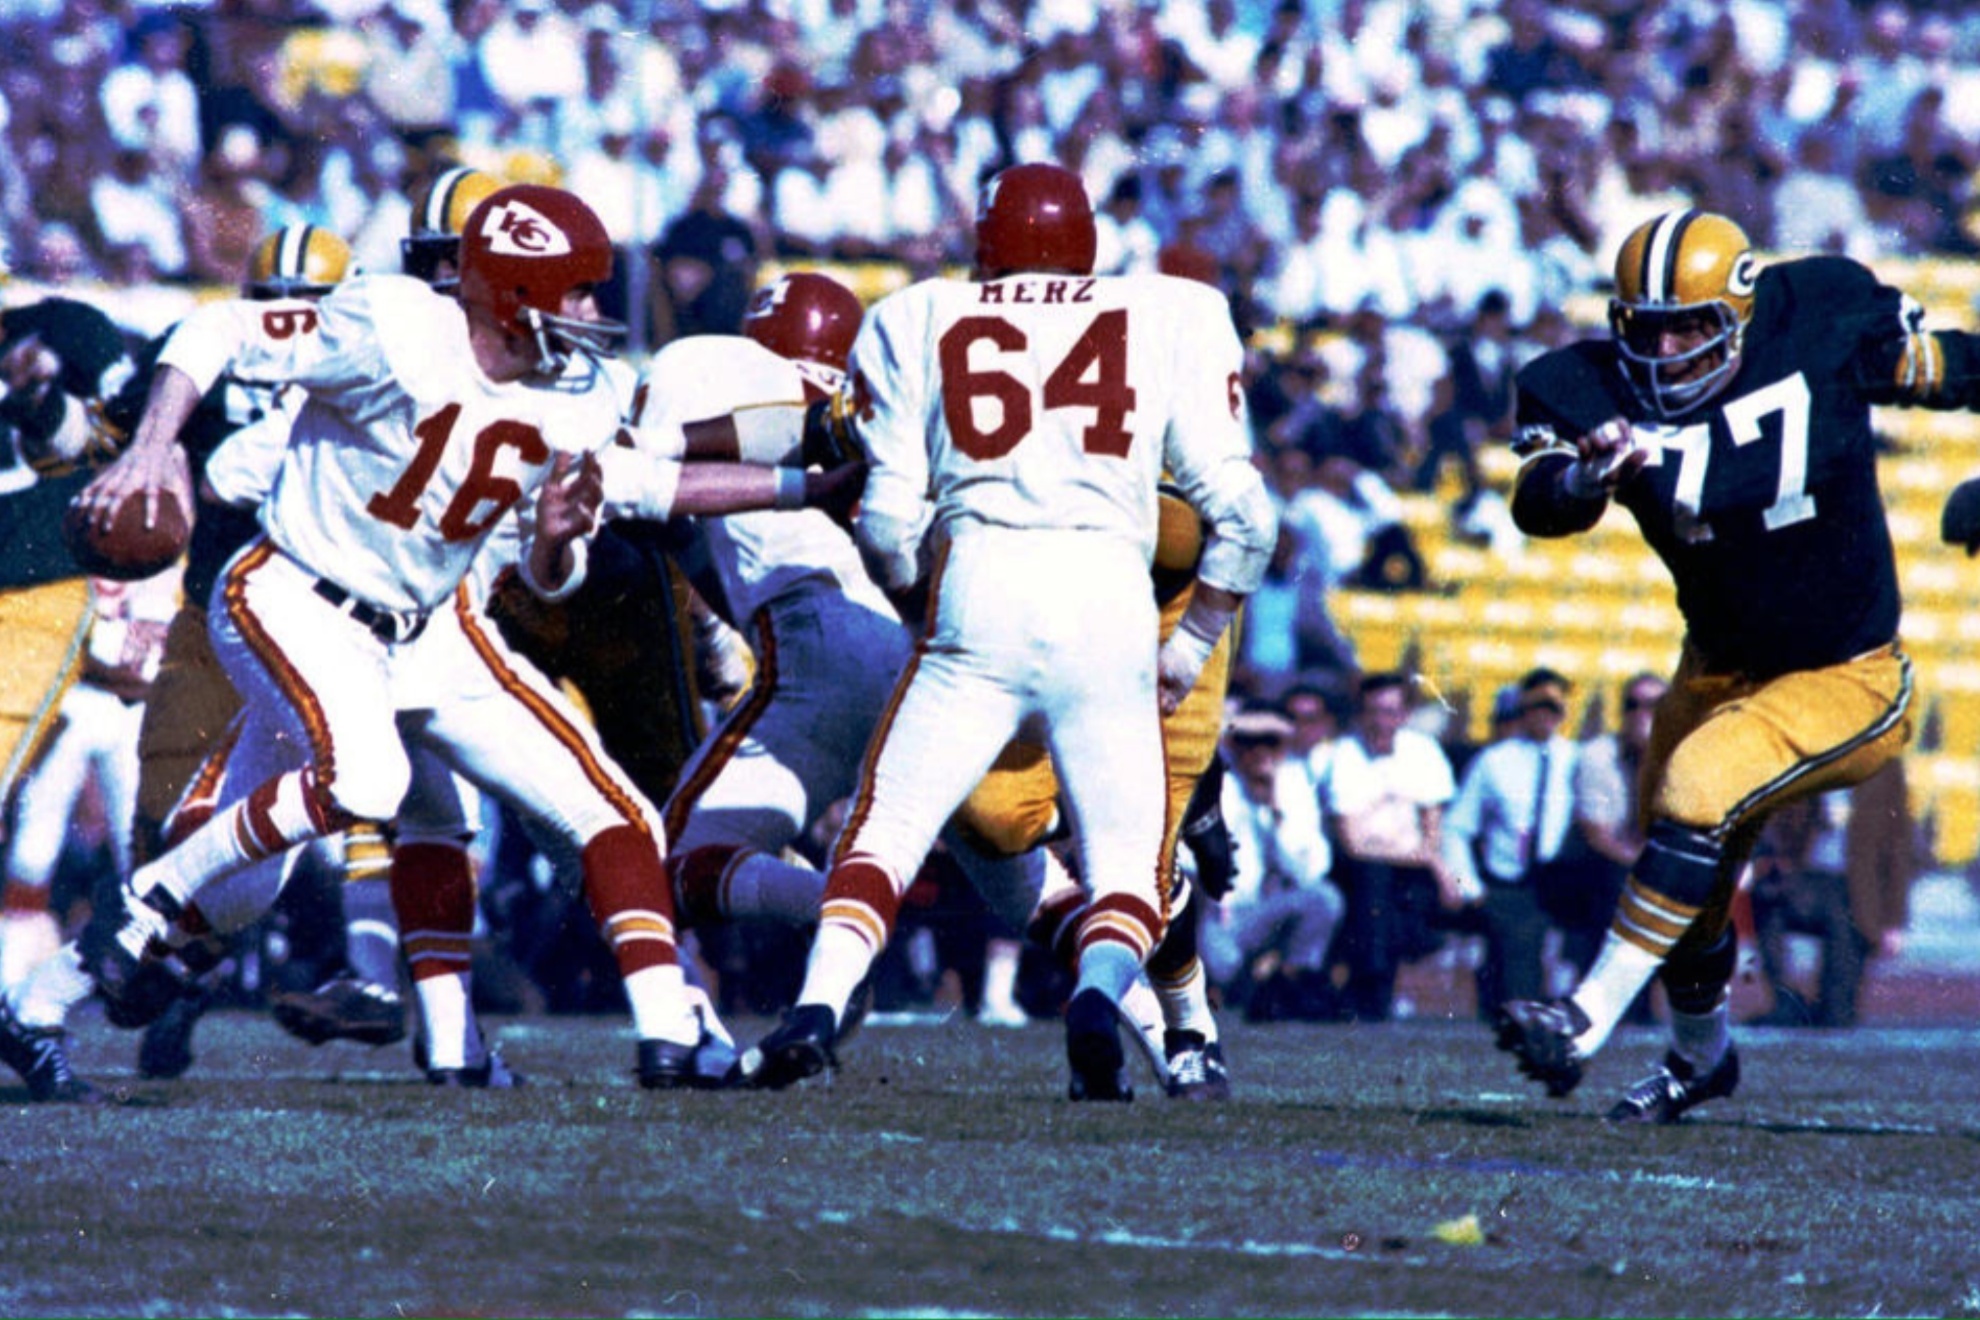 The first Super Bowl was played on January 15, 1967 in the Los Angeles Coliseum